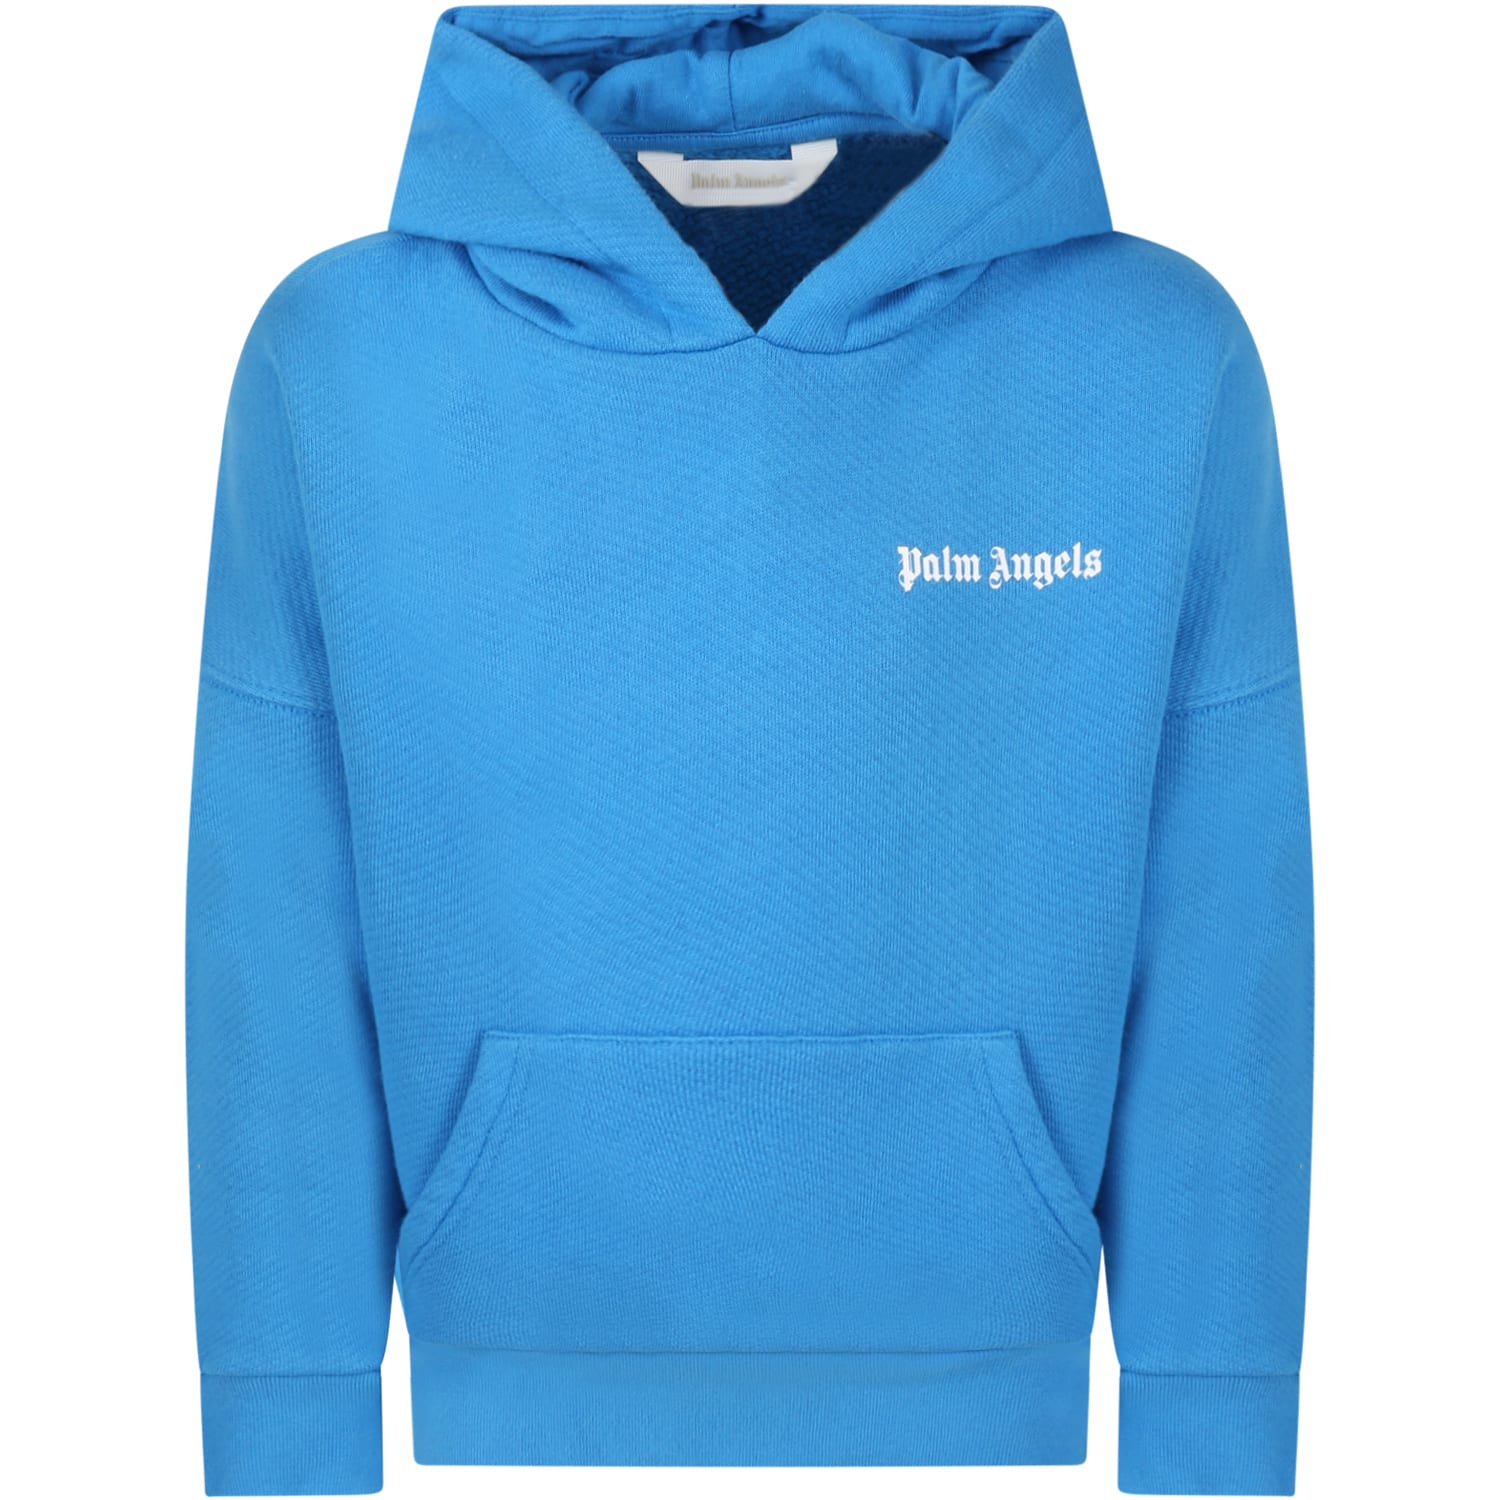 Palm Angels Light-blue Sweatshirt For Kids With White Logo